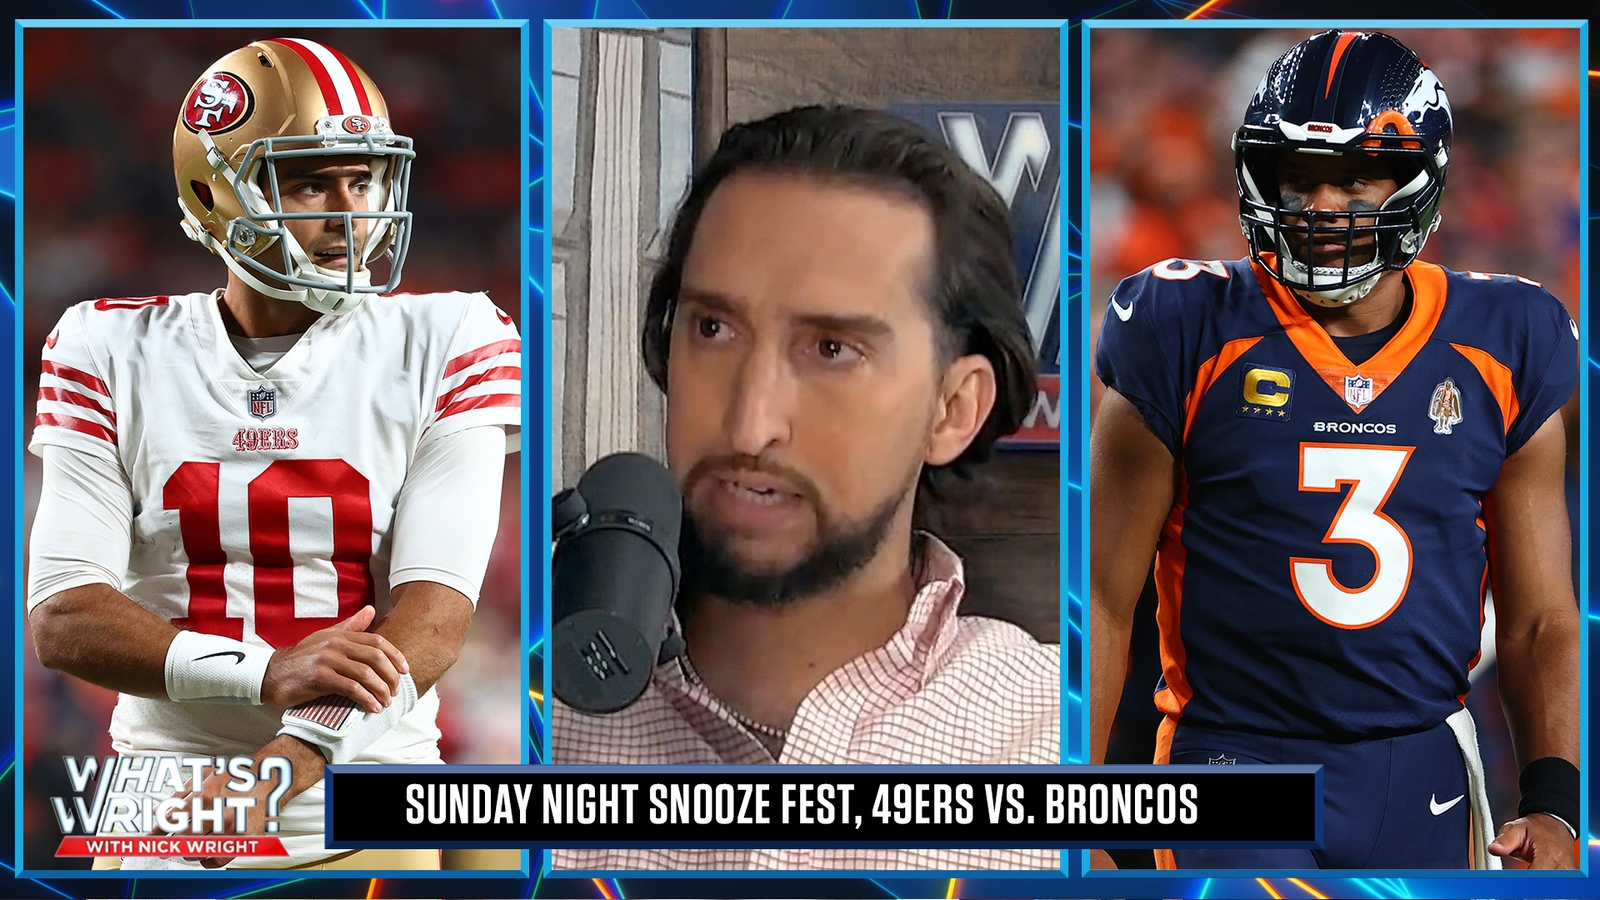 49ers vs. Broncos was one of the worst NFL games Nick has ever seen |  What is Wright?